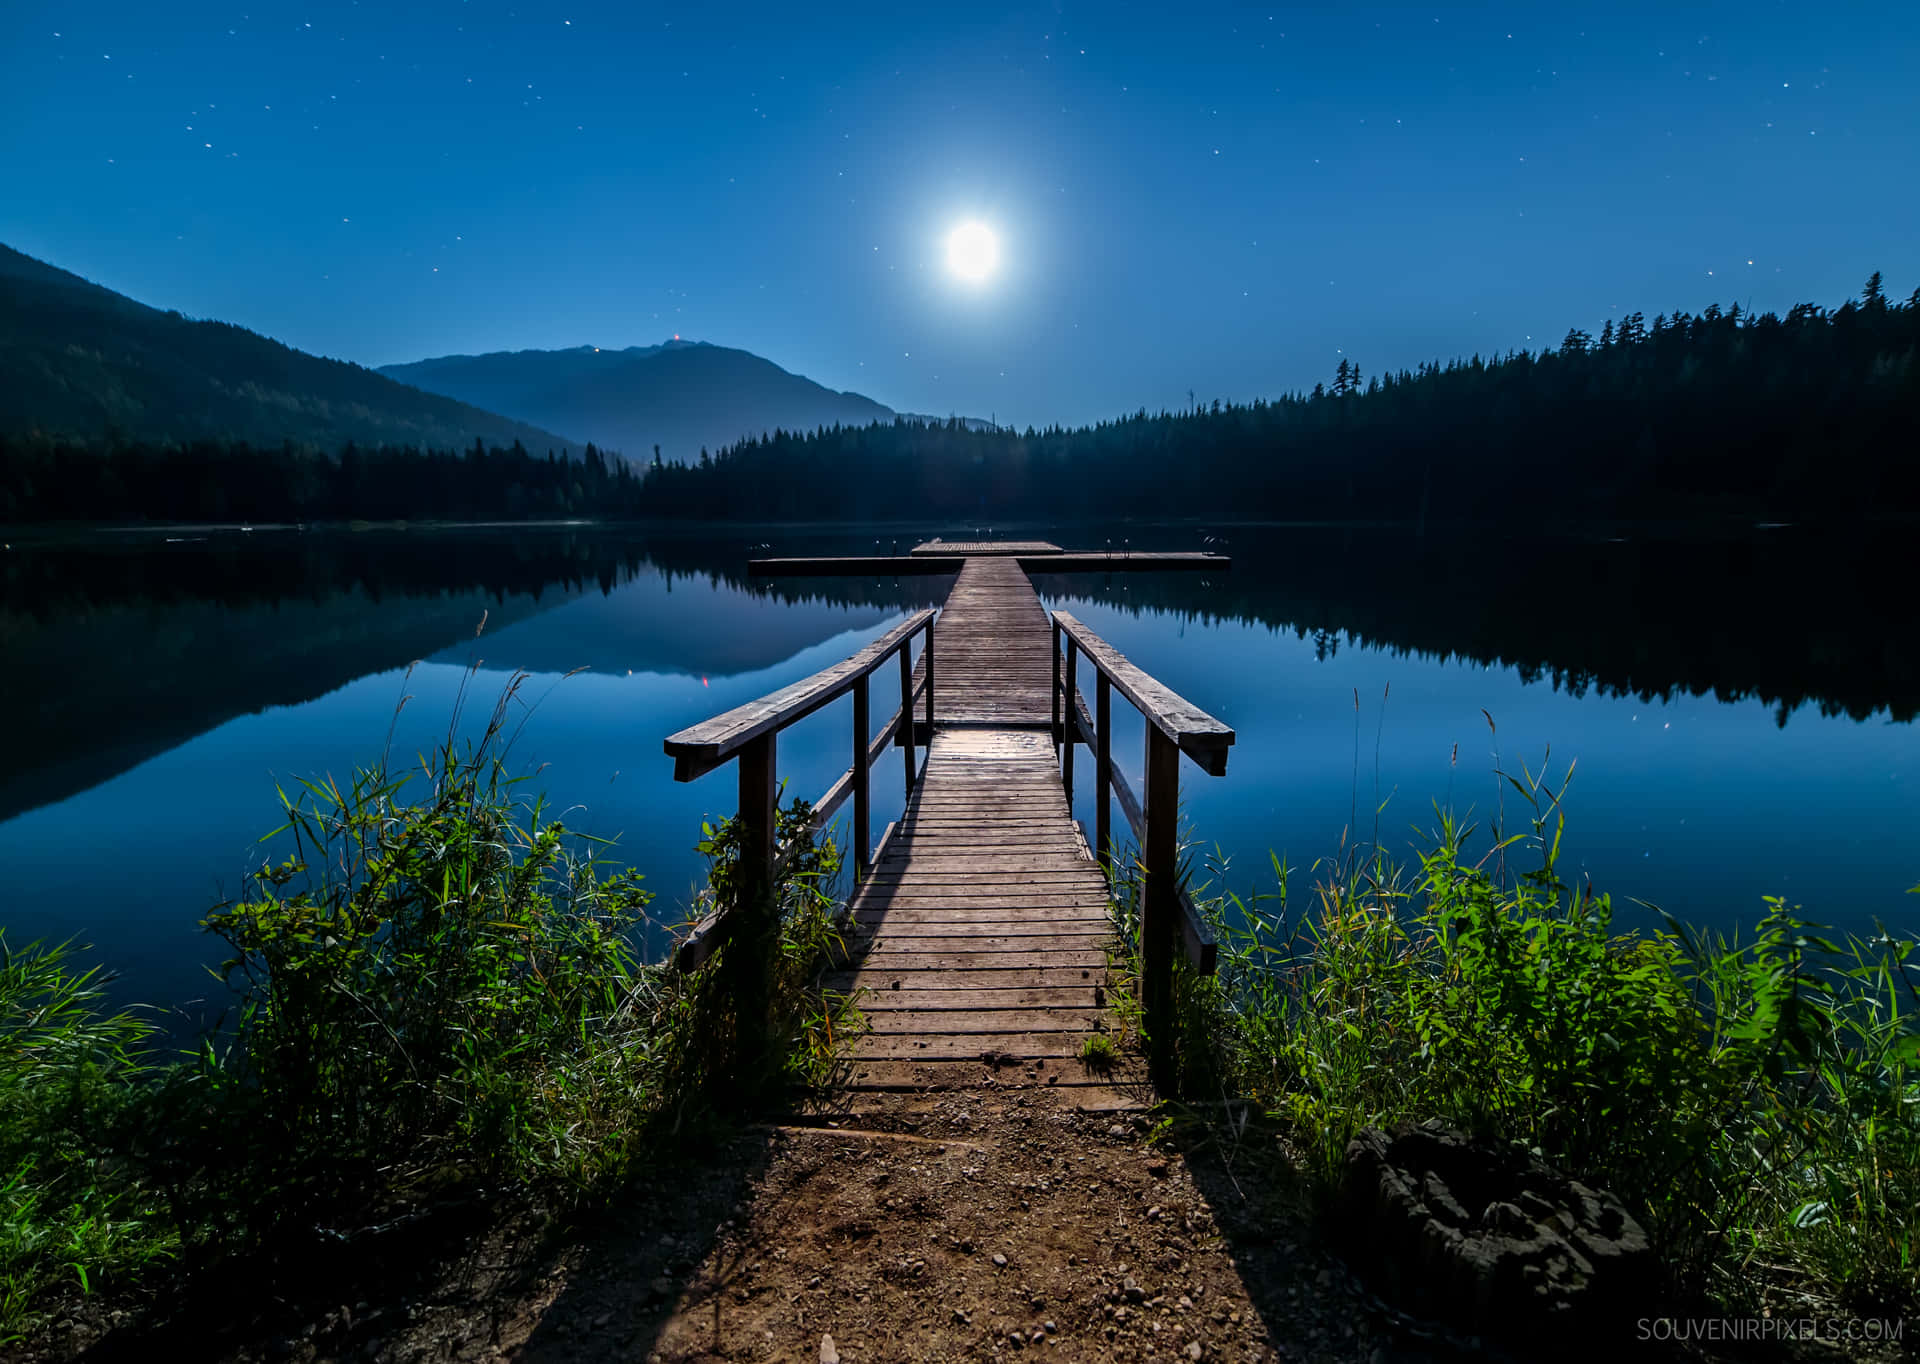 A Wooden Dock Over A Lake At Night Wallpaper